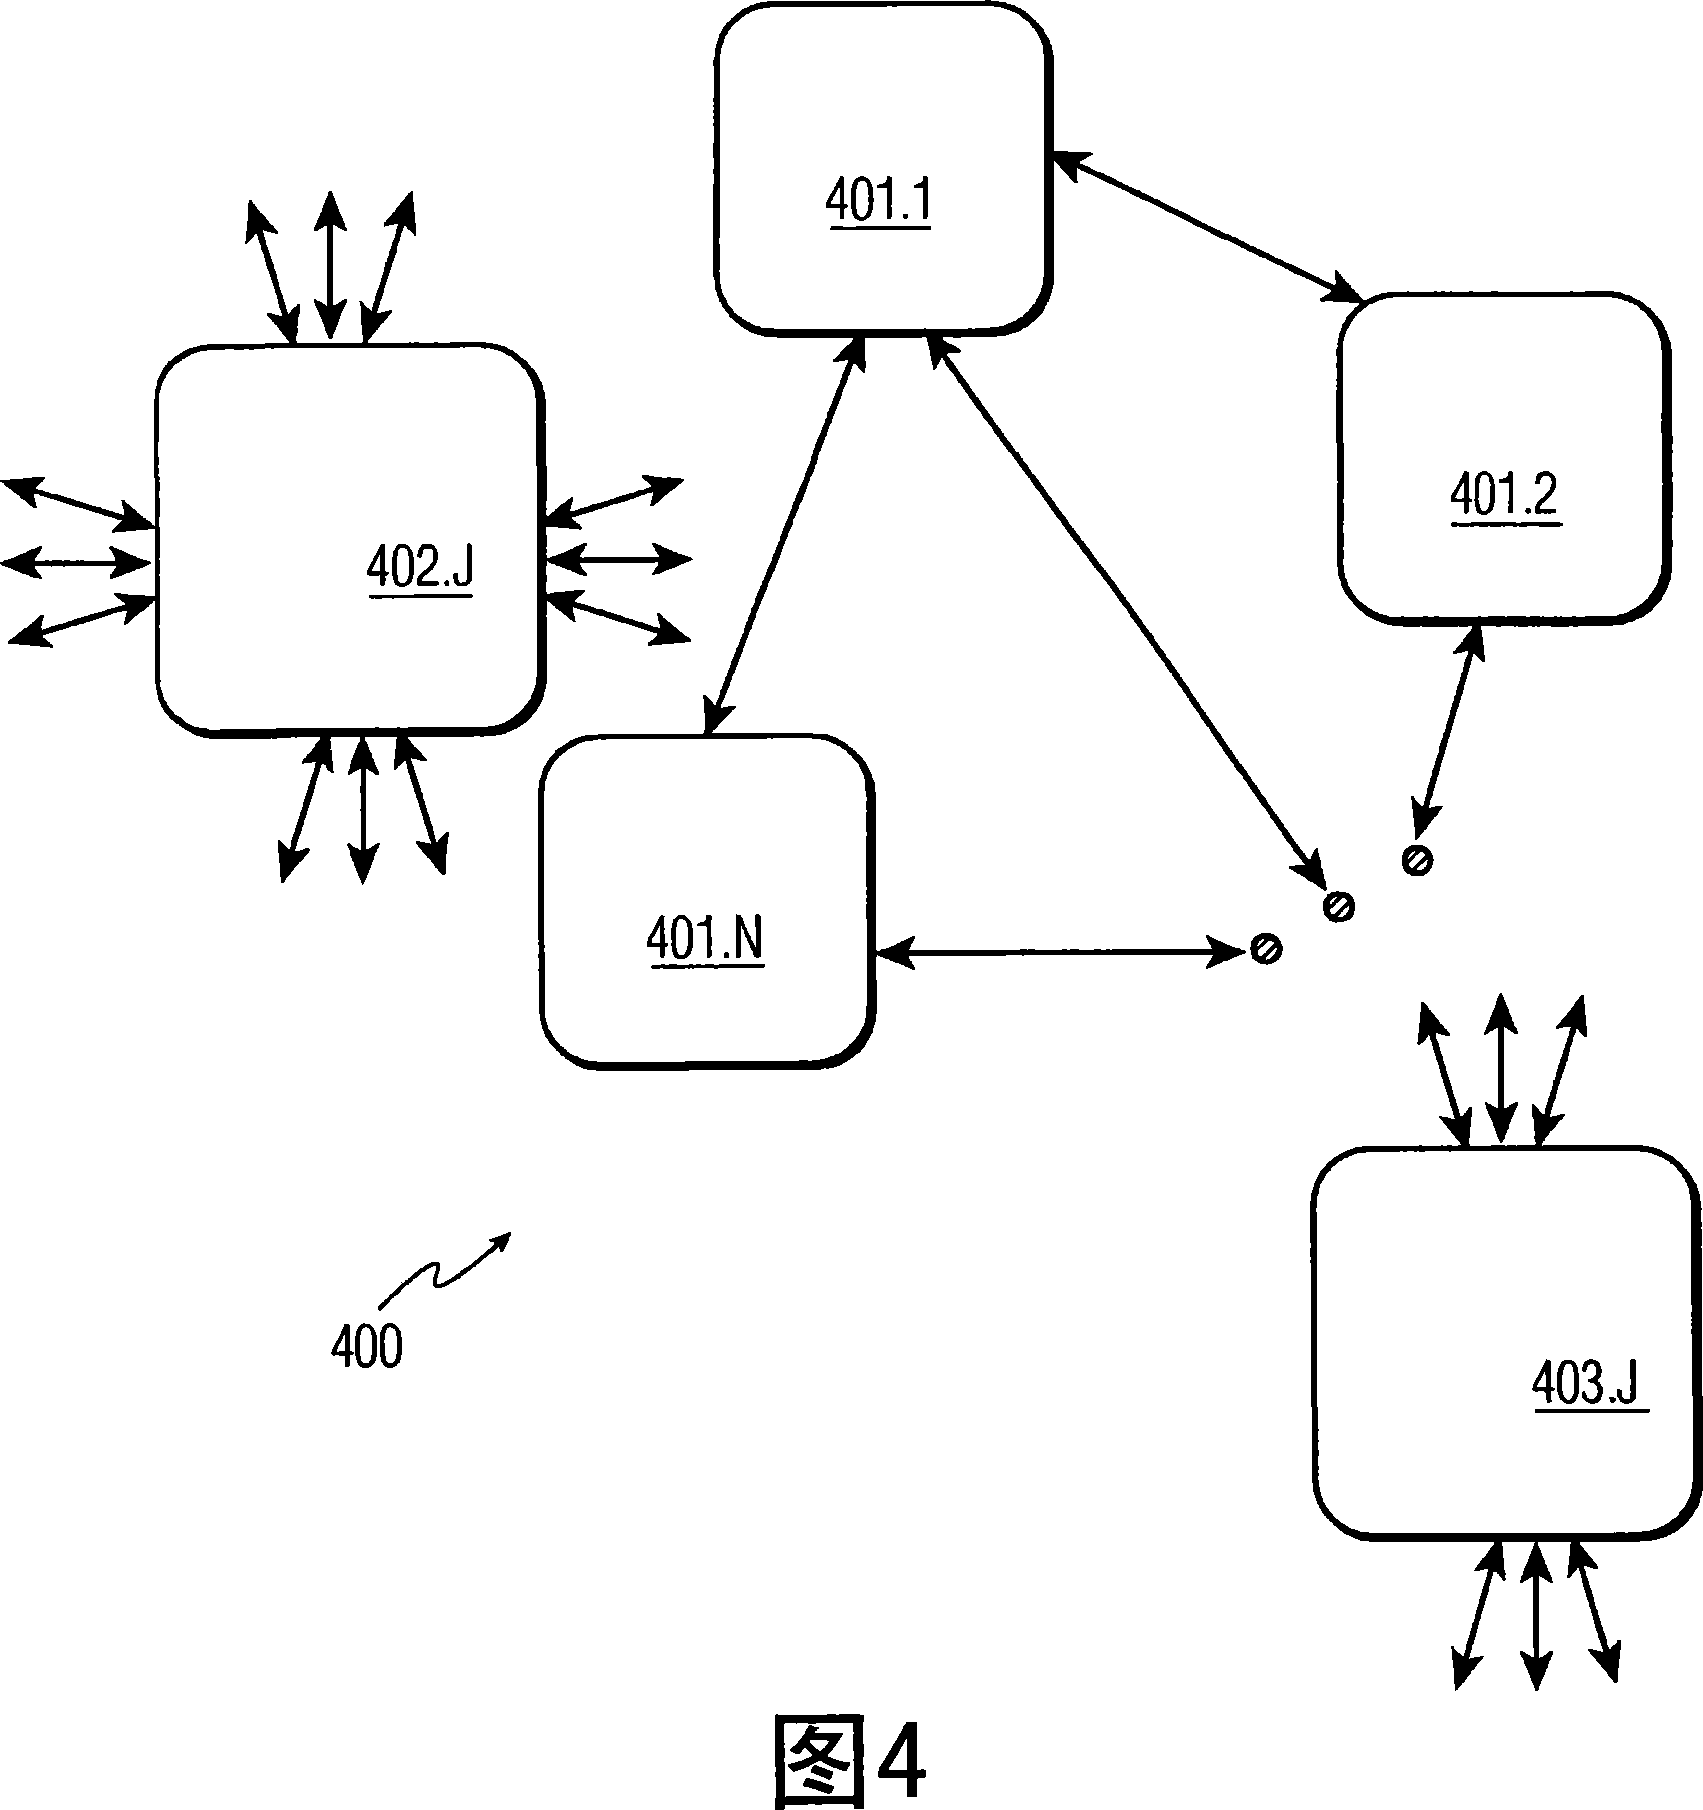 Protocol for switching between channels in type 2 agile radio